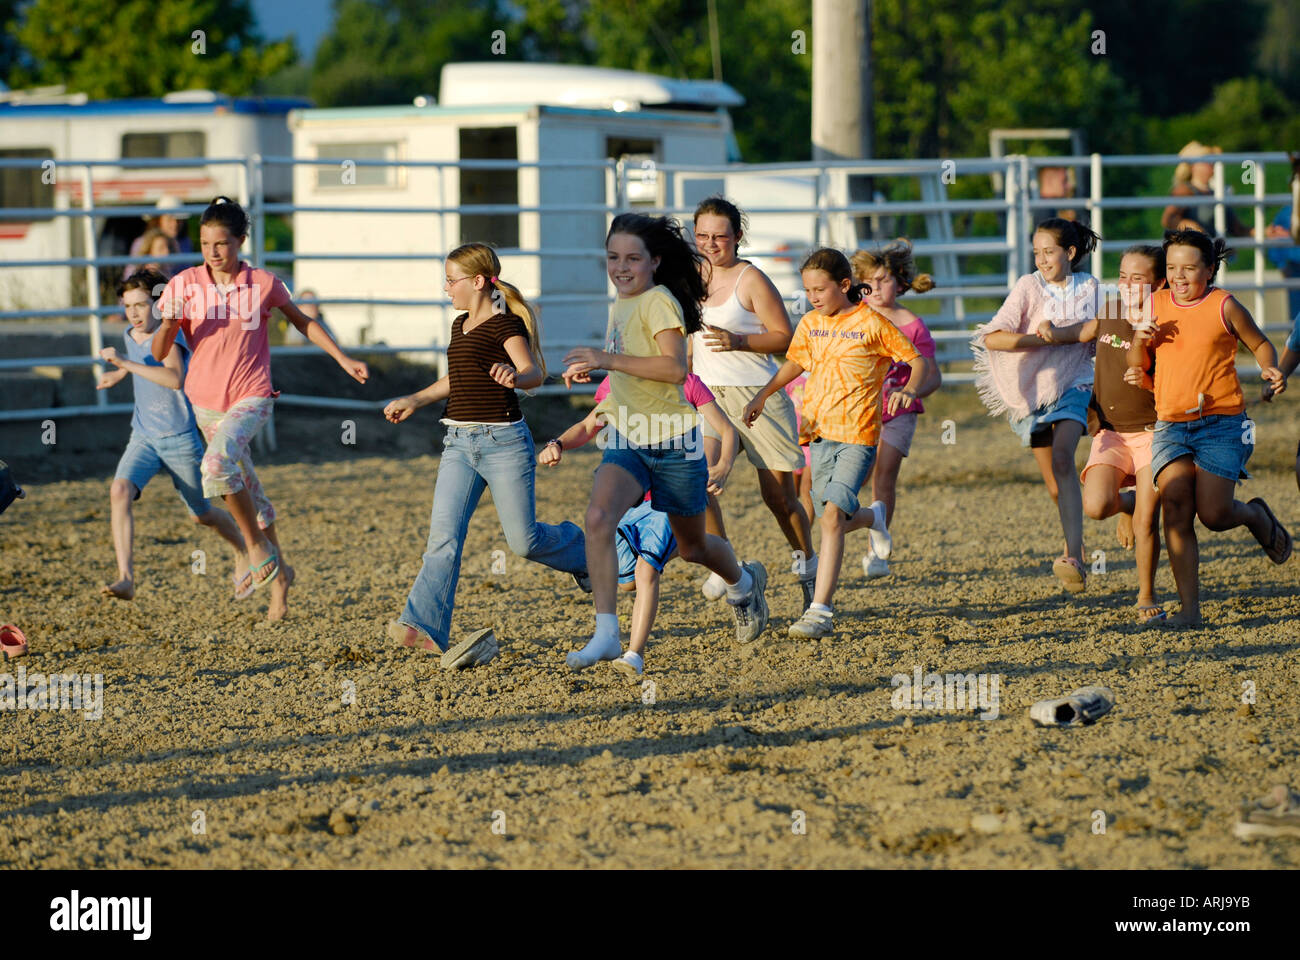 Children run into the middle of a rodeo ring as part of the festivities of a rodeo Stock Photo